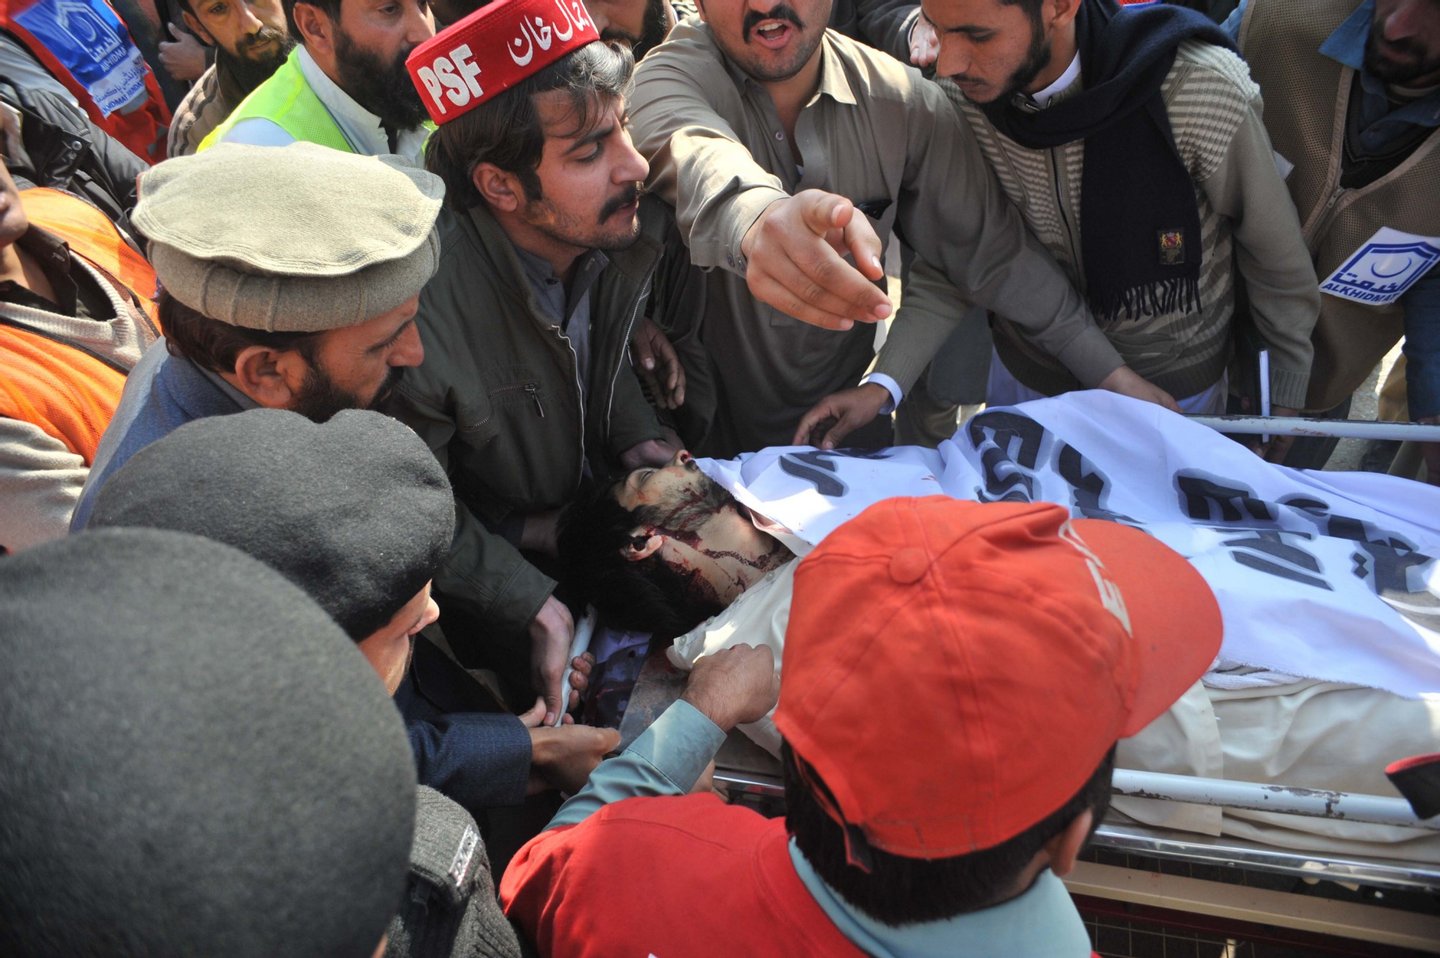 Pakistani rescue workers carry an injured student on arrival at a hospital following an attack by gunmen at Bacha Khan university in Charsadda, about 50 kilometres from Peshawar, on January 20, 2016. At least 21 people died in an armed assault on a university in Pakistan on January 20, where witnesses reported two large explosions as security forces moved in under dense fog to halt the bloodshed. AFP PHOTO / Hasham AHMED / AFP / HASHAM AHMED (Photo credit should read HASHAM AHMED/AFP/Getty Images)